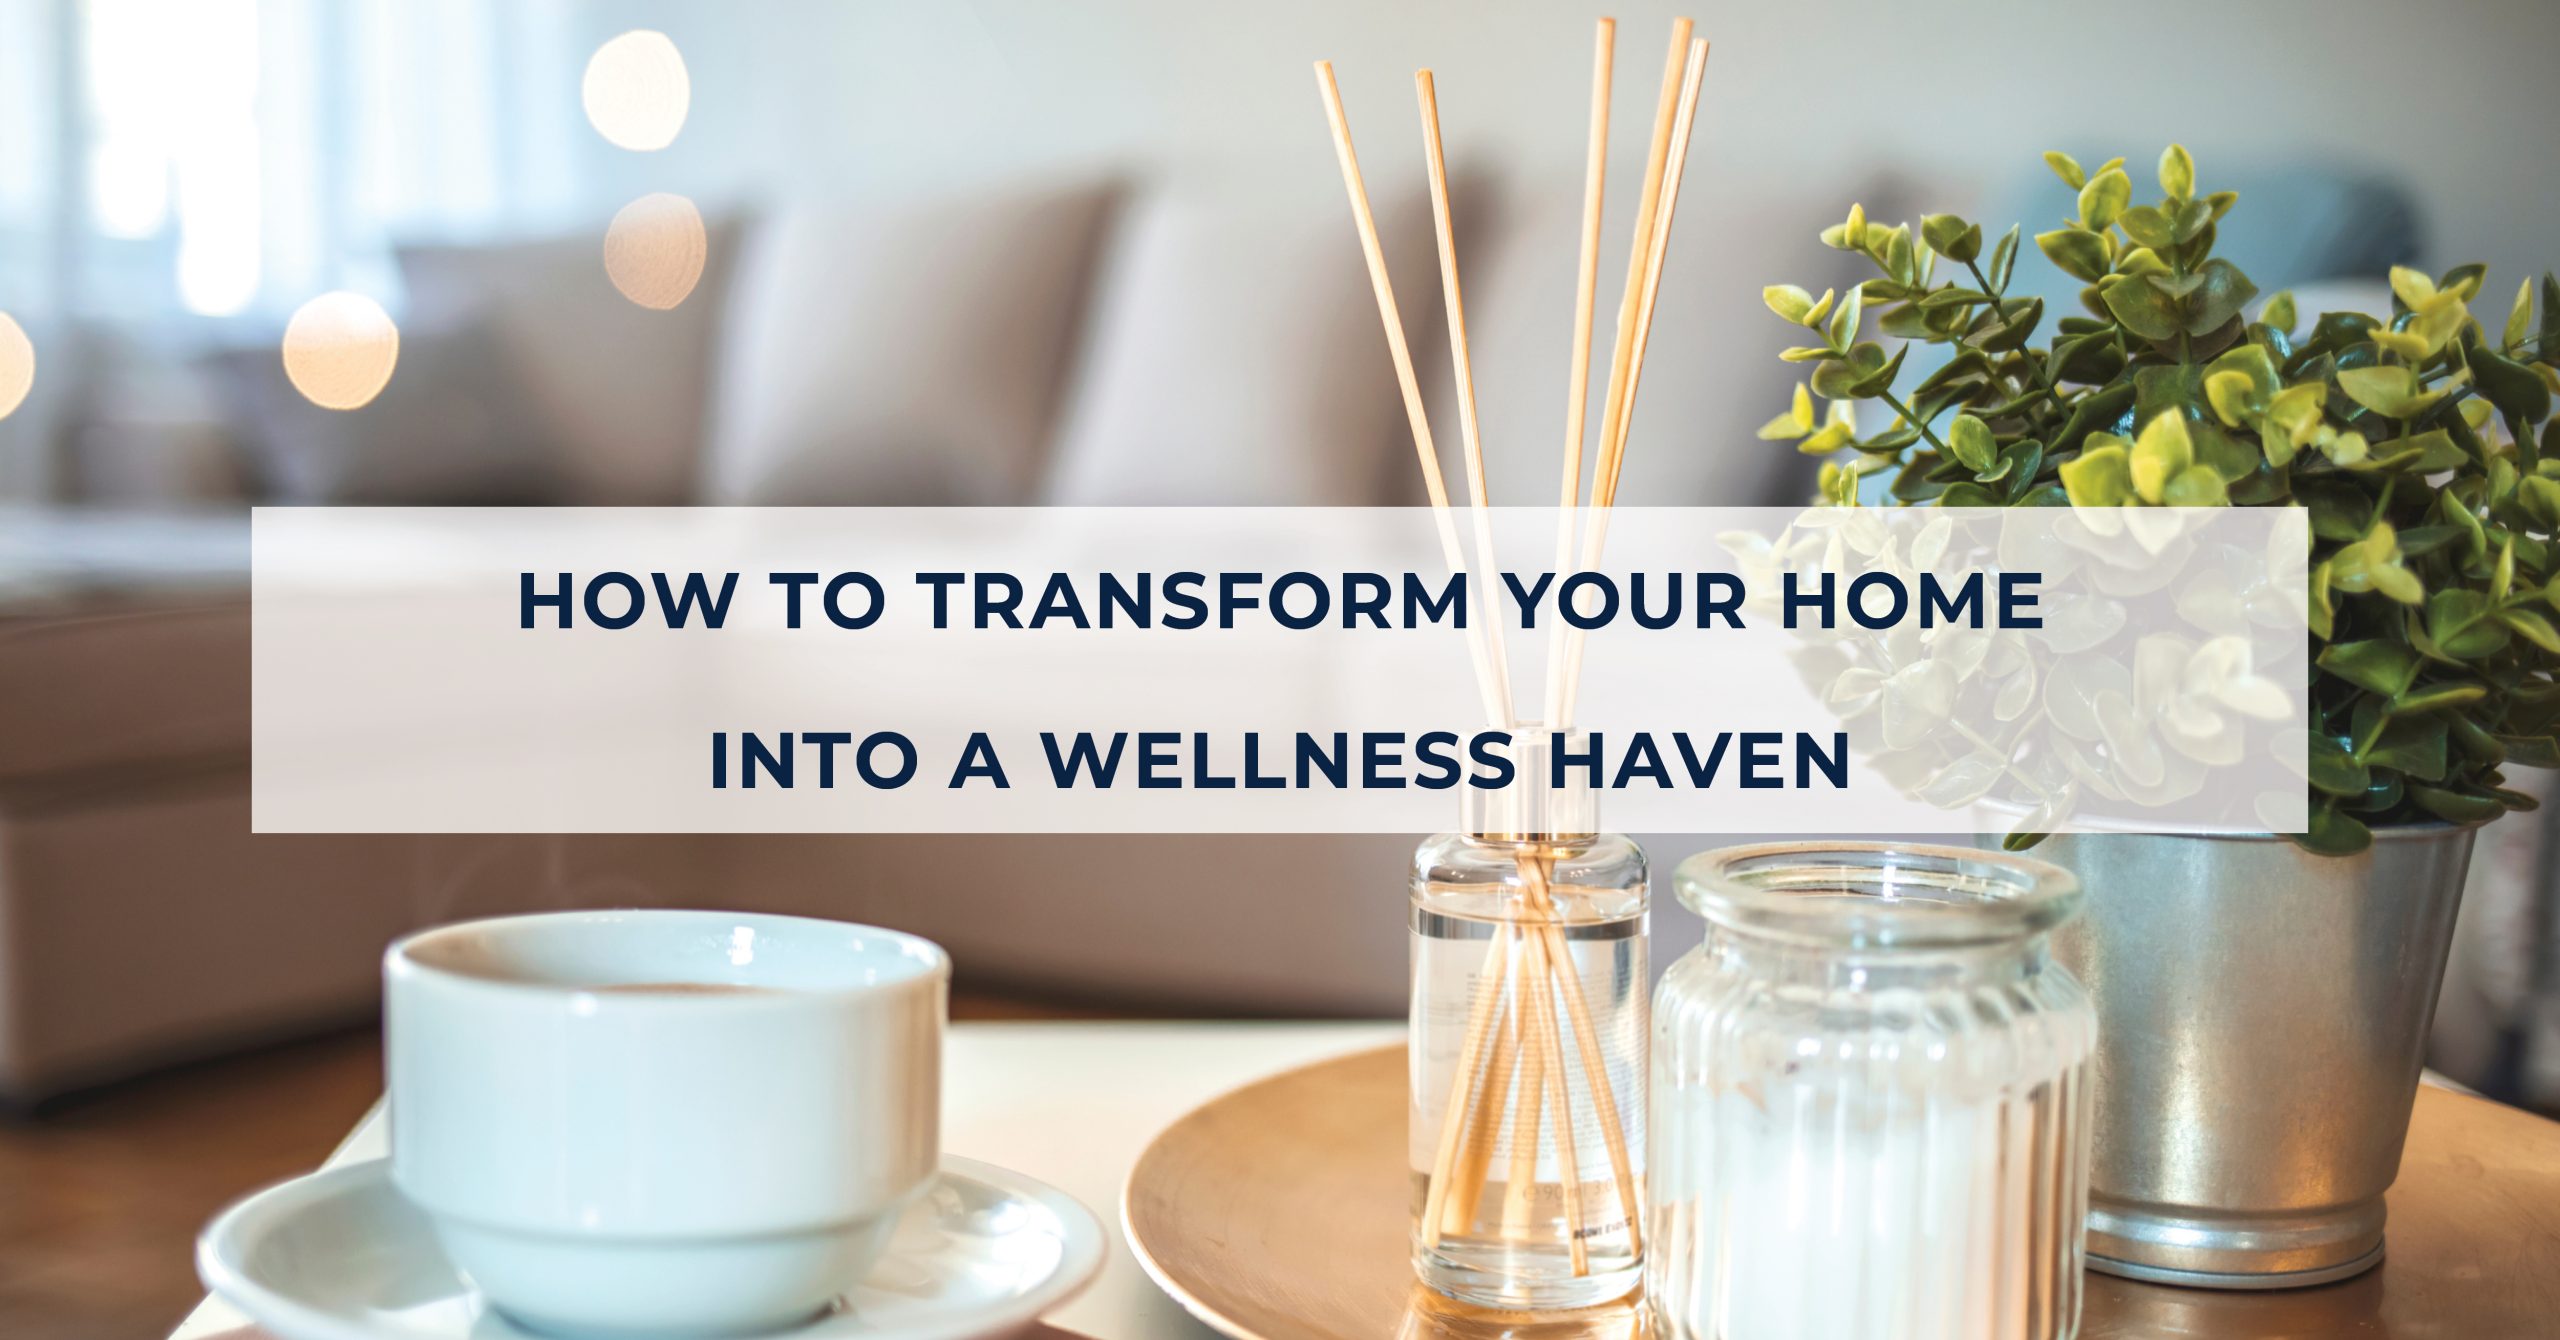 How to Transform Your Home into a Wellness Haven